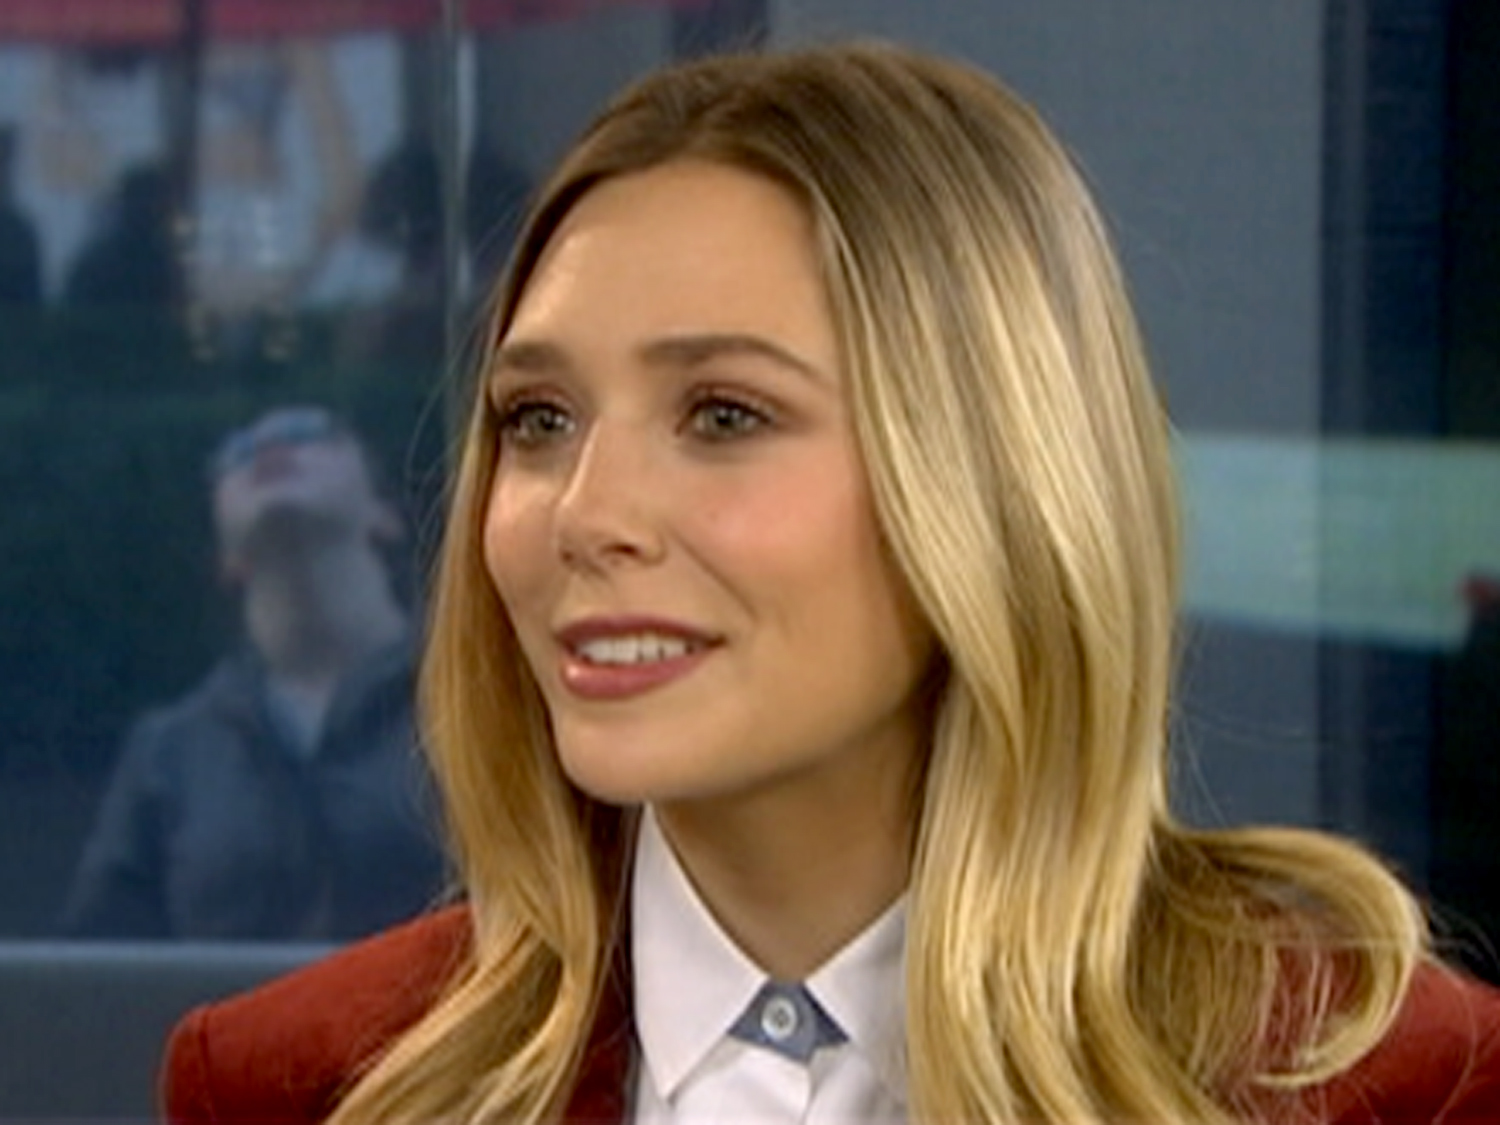 Olsen twins’ sis takes spotlight in ‘Silent House’ - TODAY.com